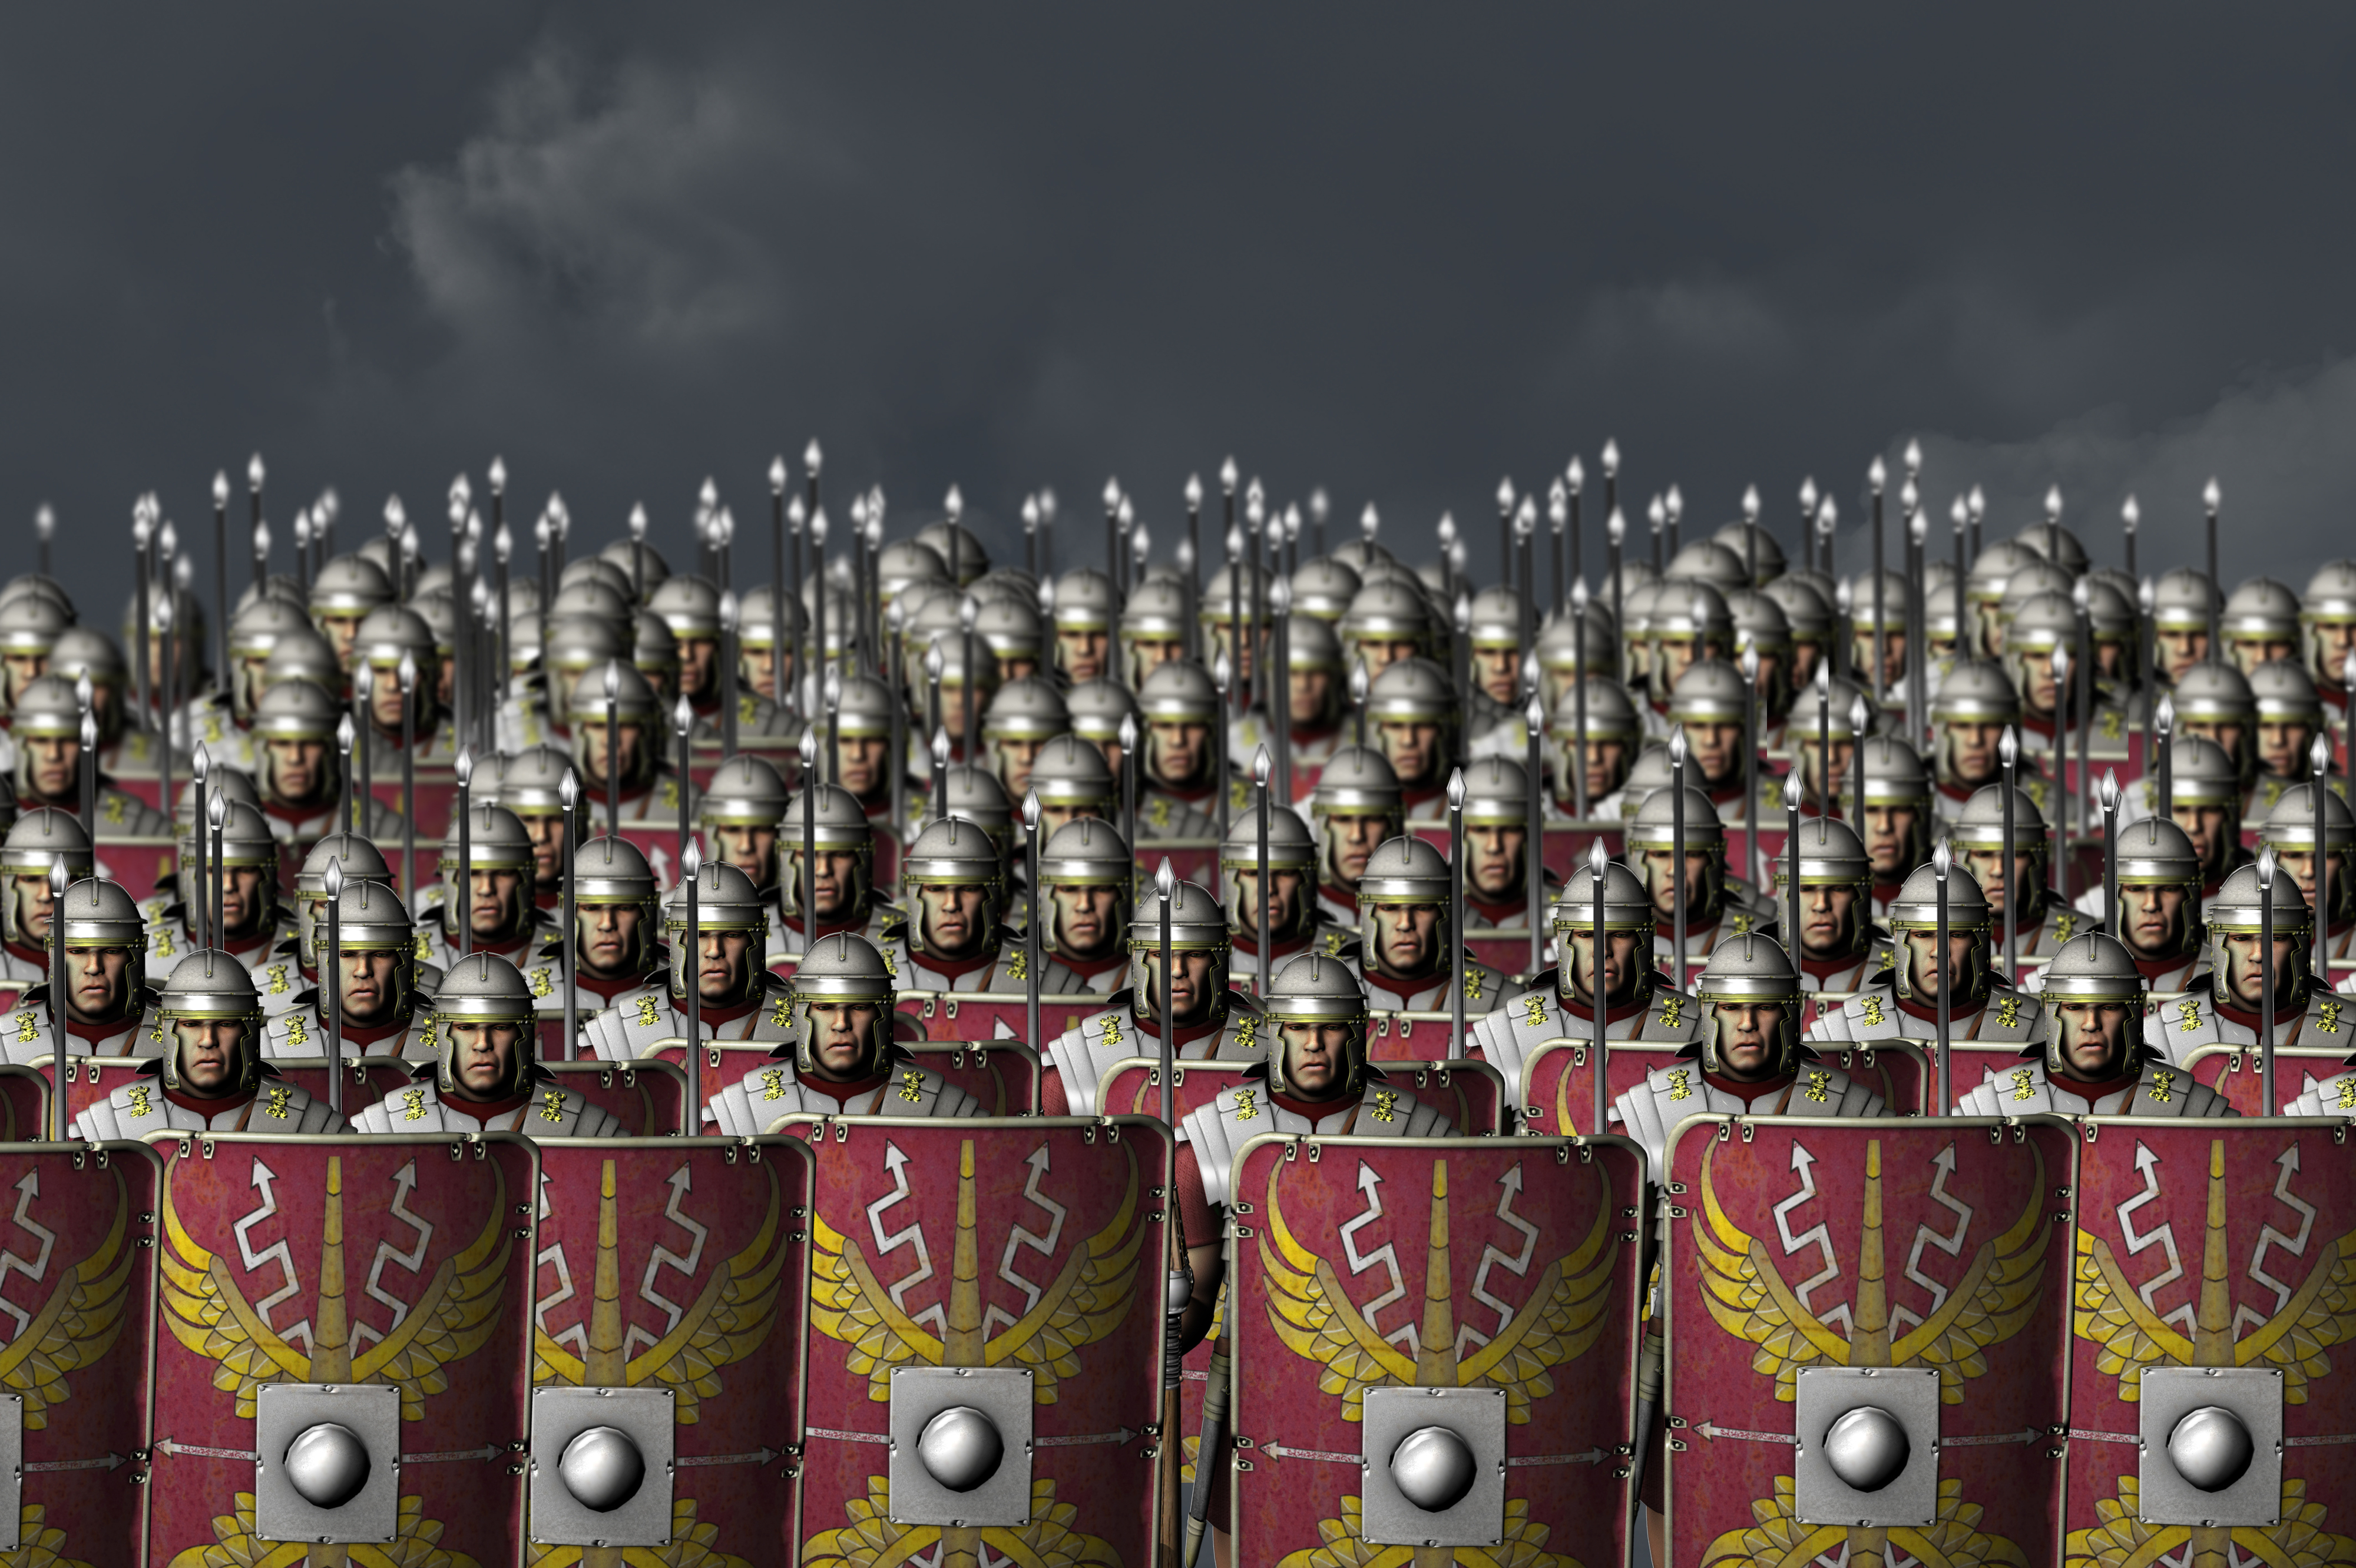 Soldiers ready for battle with their shields and spears